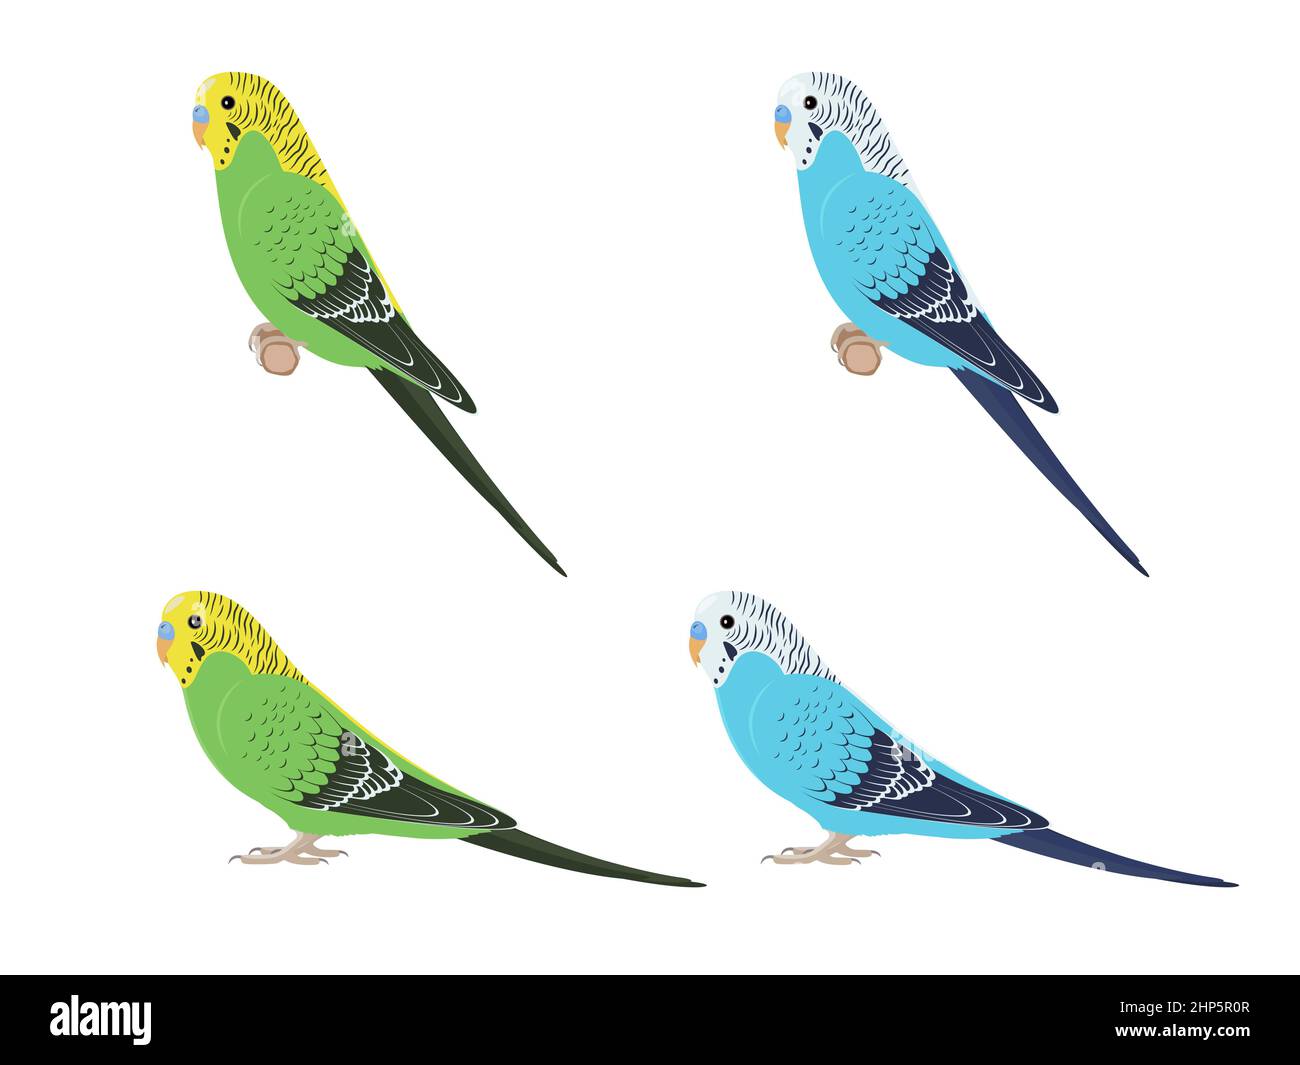 Set of budgies parrots. Vector illustration of green and blue budgerigars parrots on white background. Stock Vector